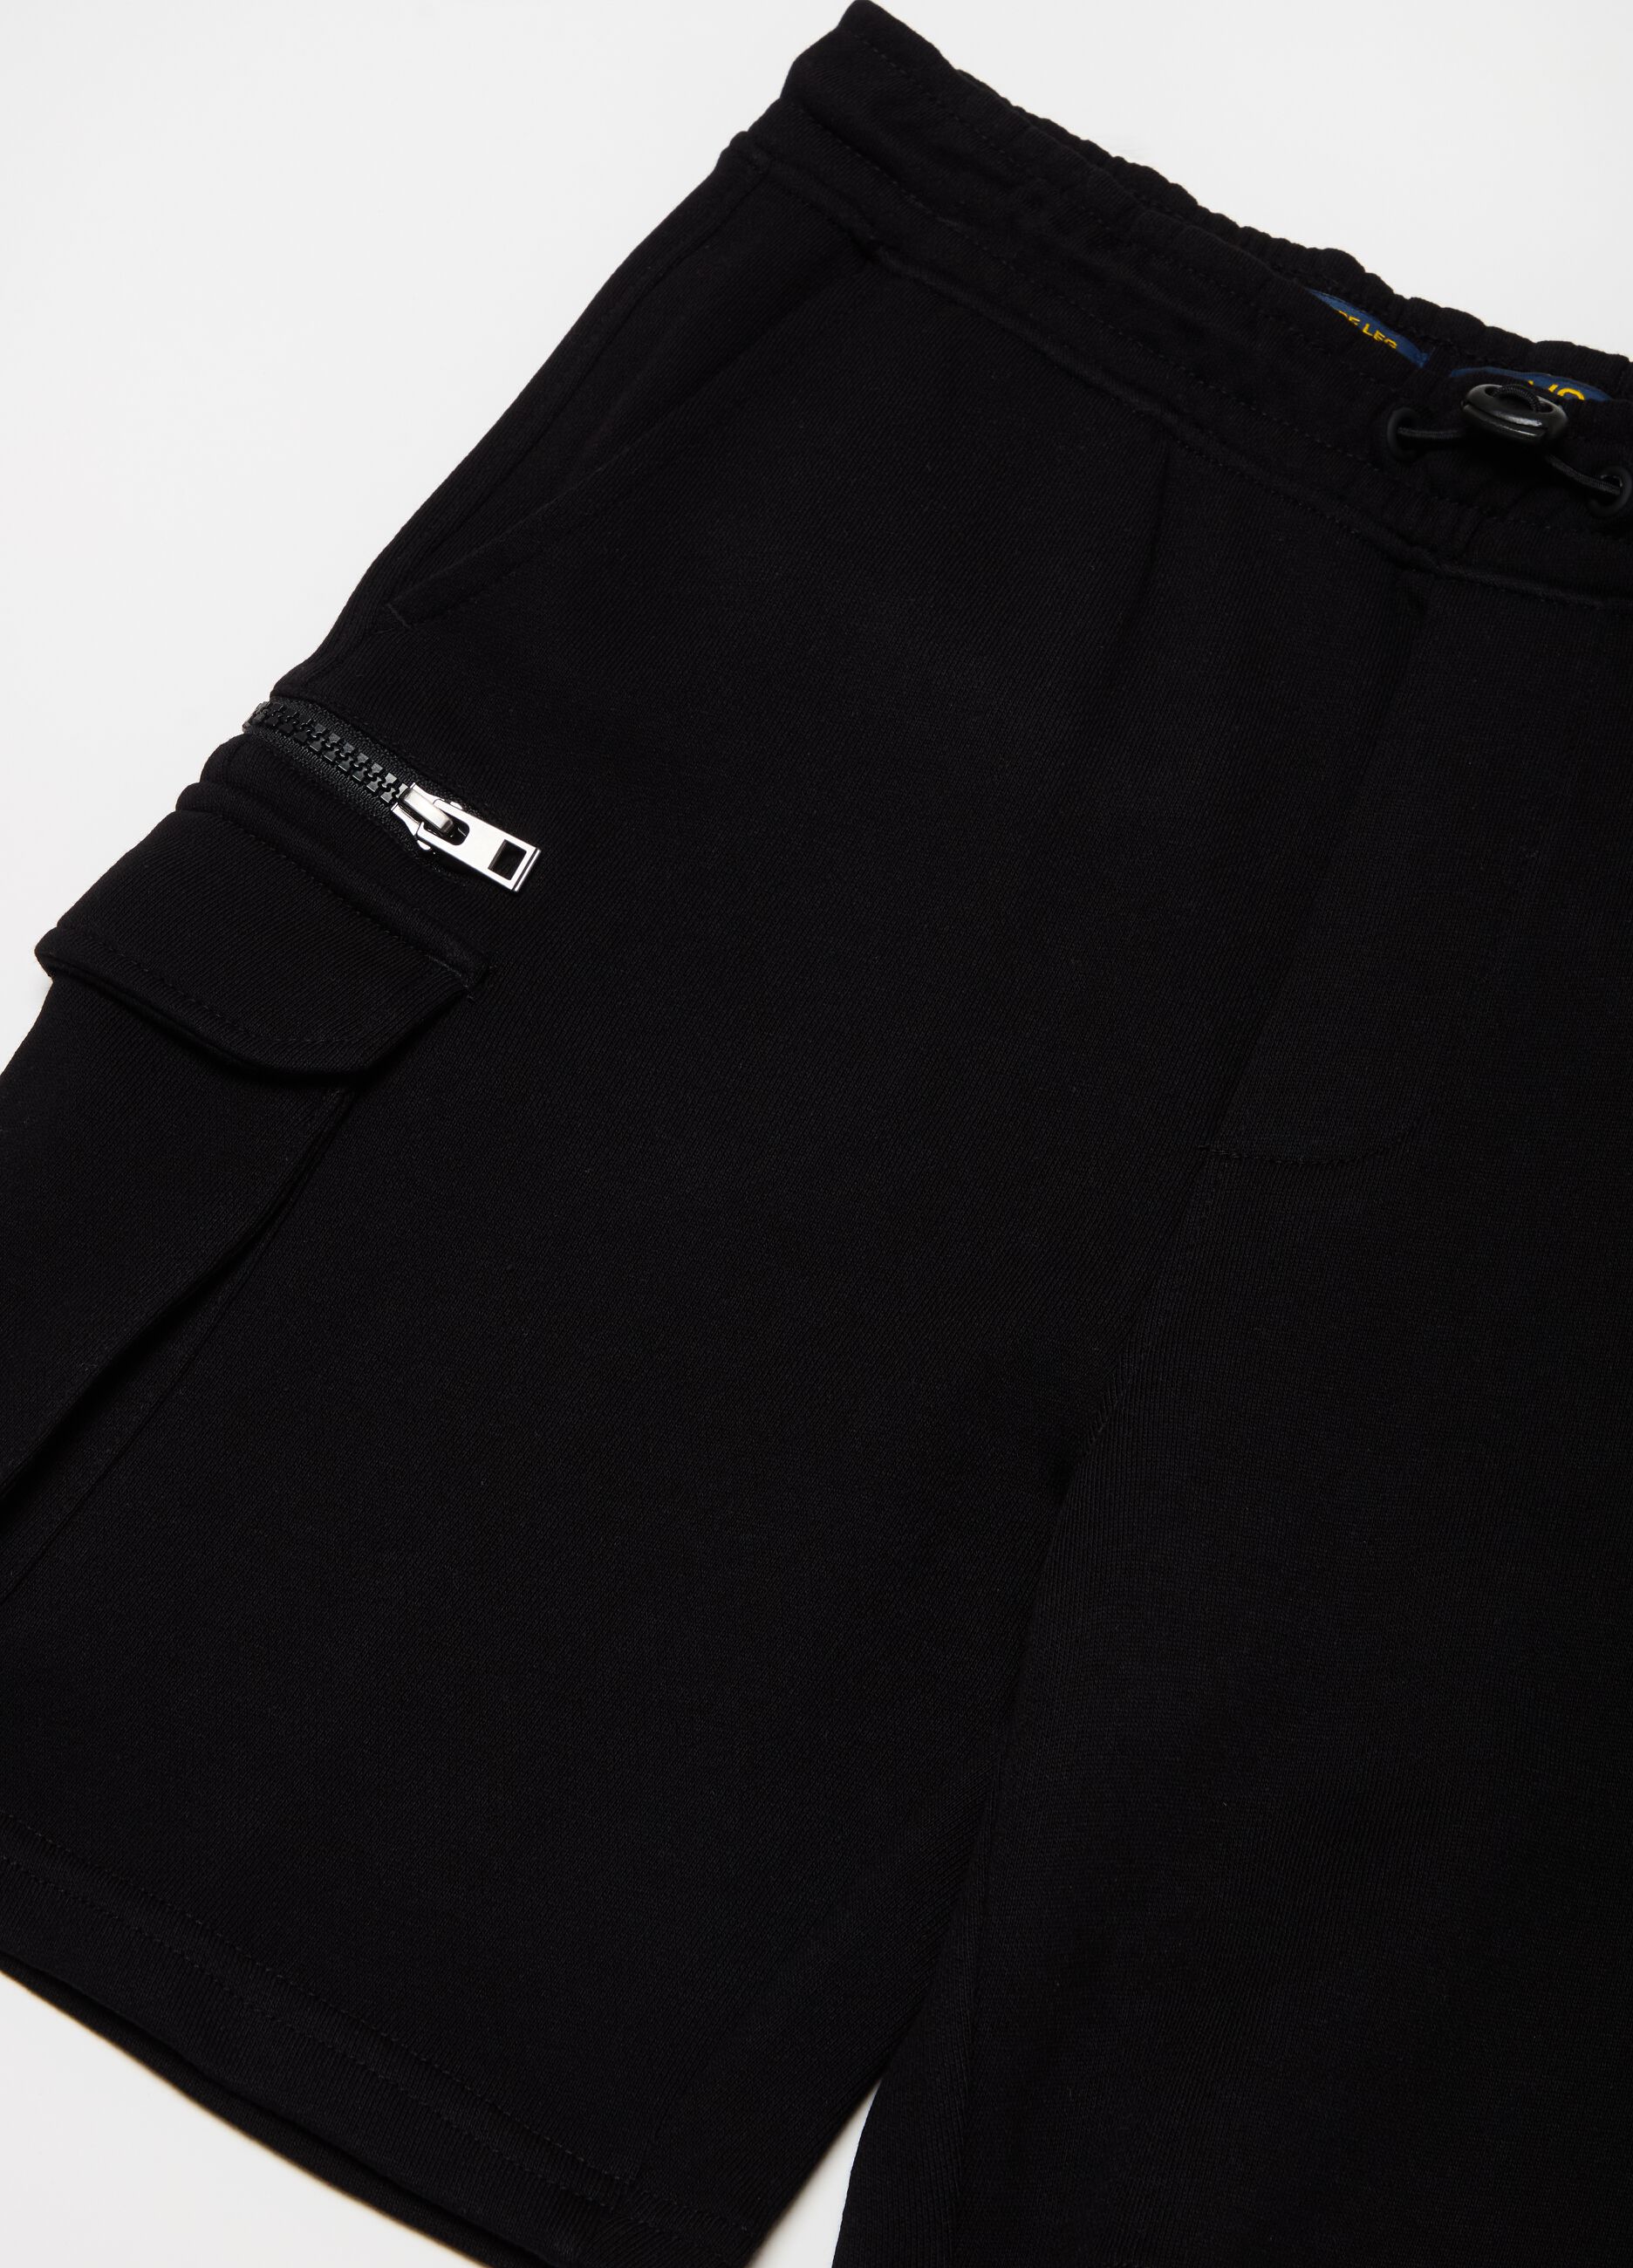 Cargo shorts in French Terry with drawstring